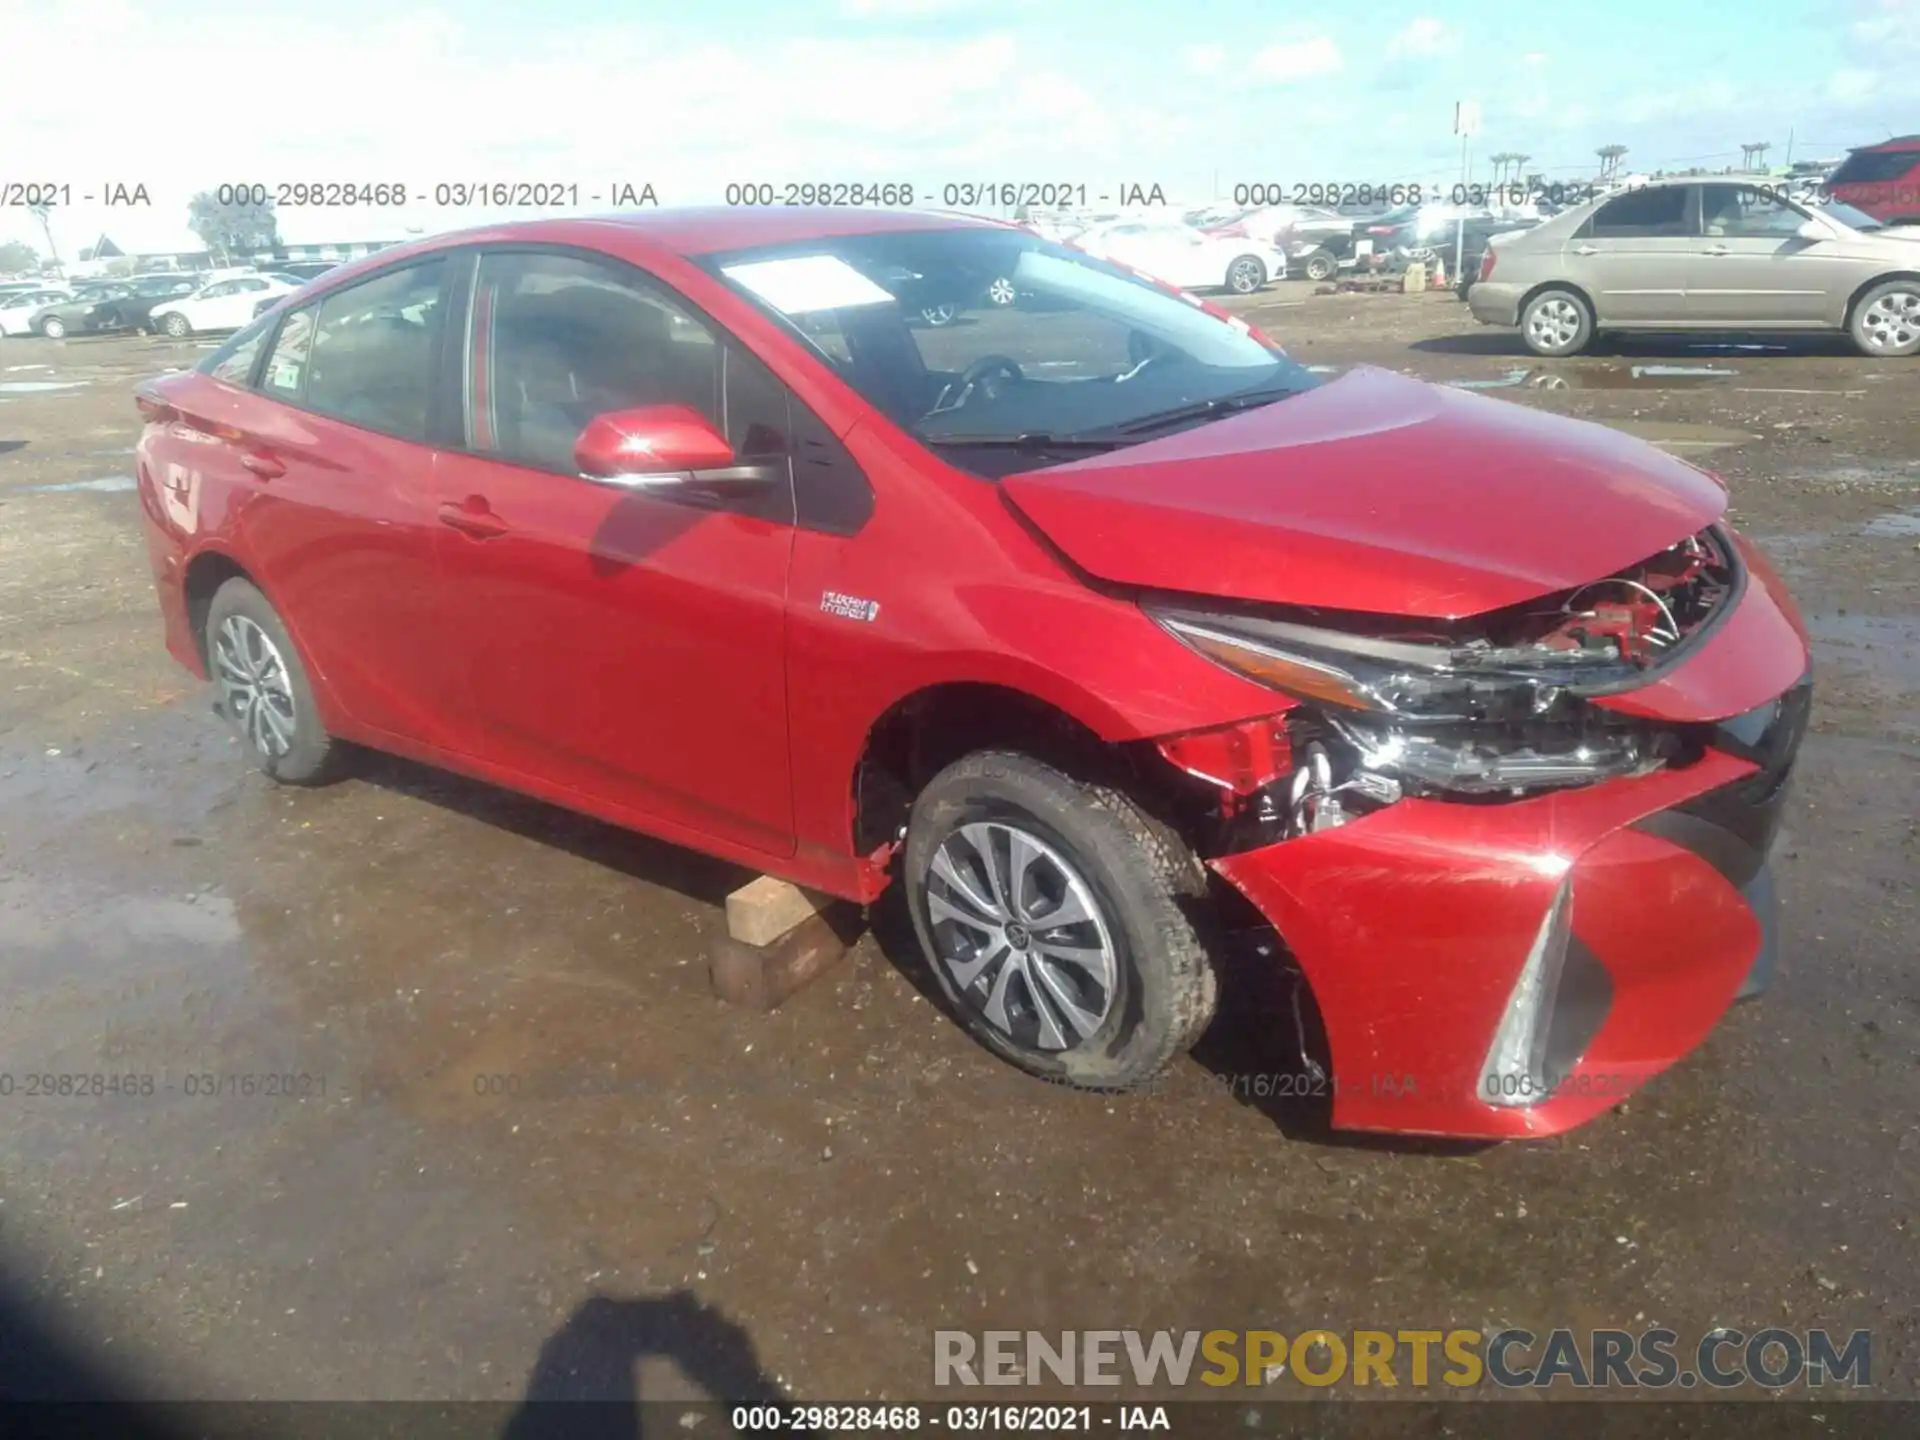 1 Photograph of a damaged car JTDKAMFPXM3170209 TOYOTA PRIUS PRIME 2021